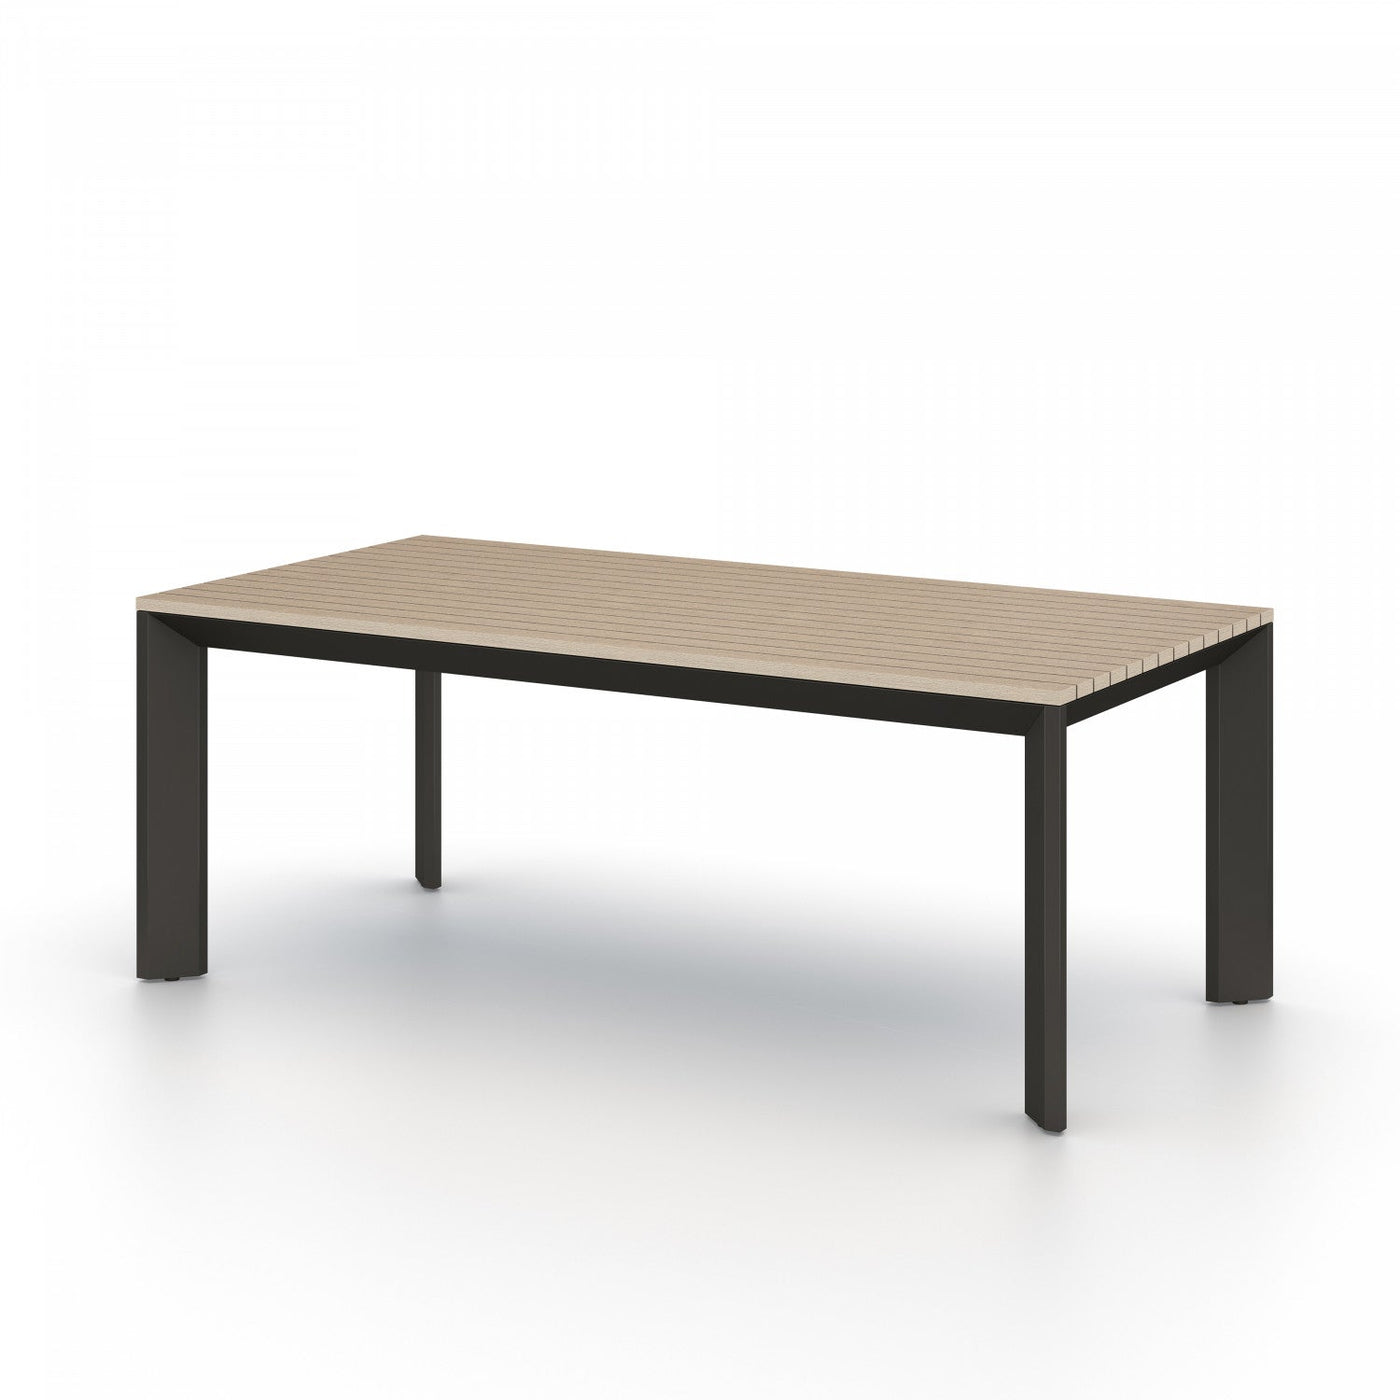 KELSO OUTDOOR DINING TABLE